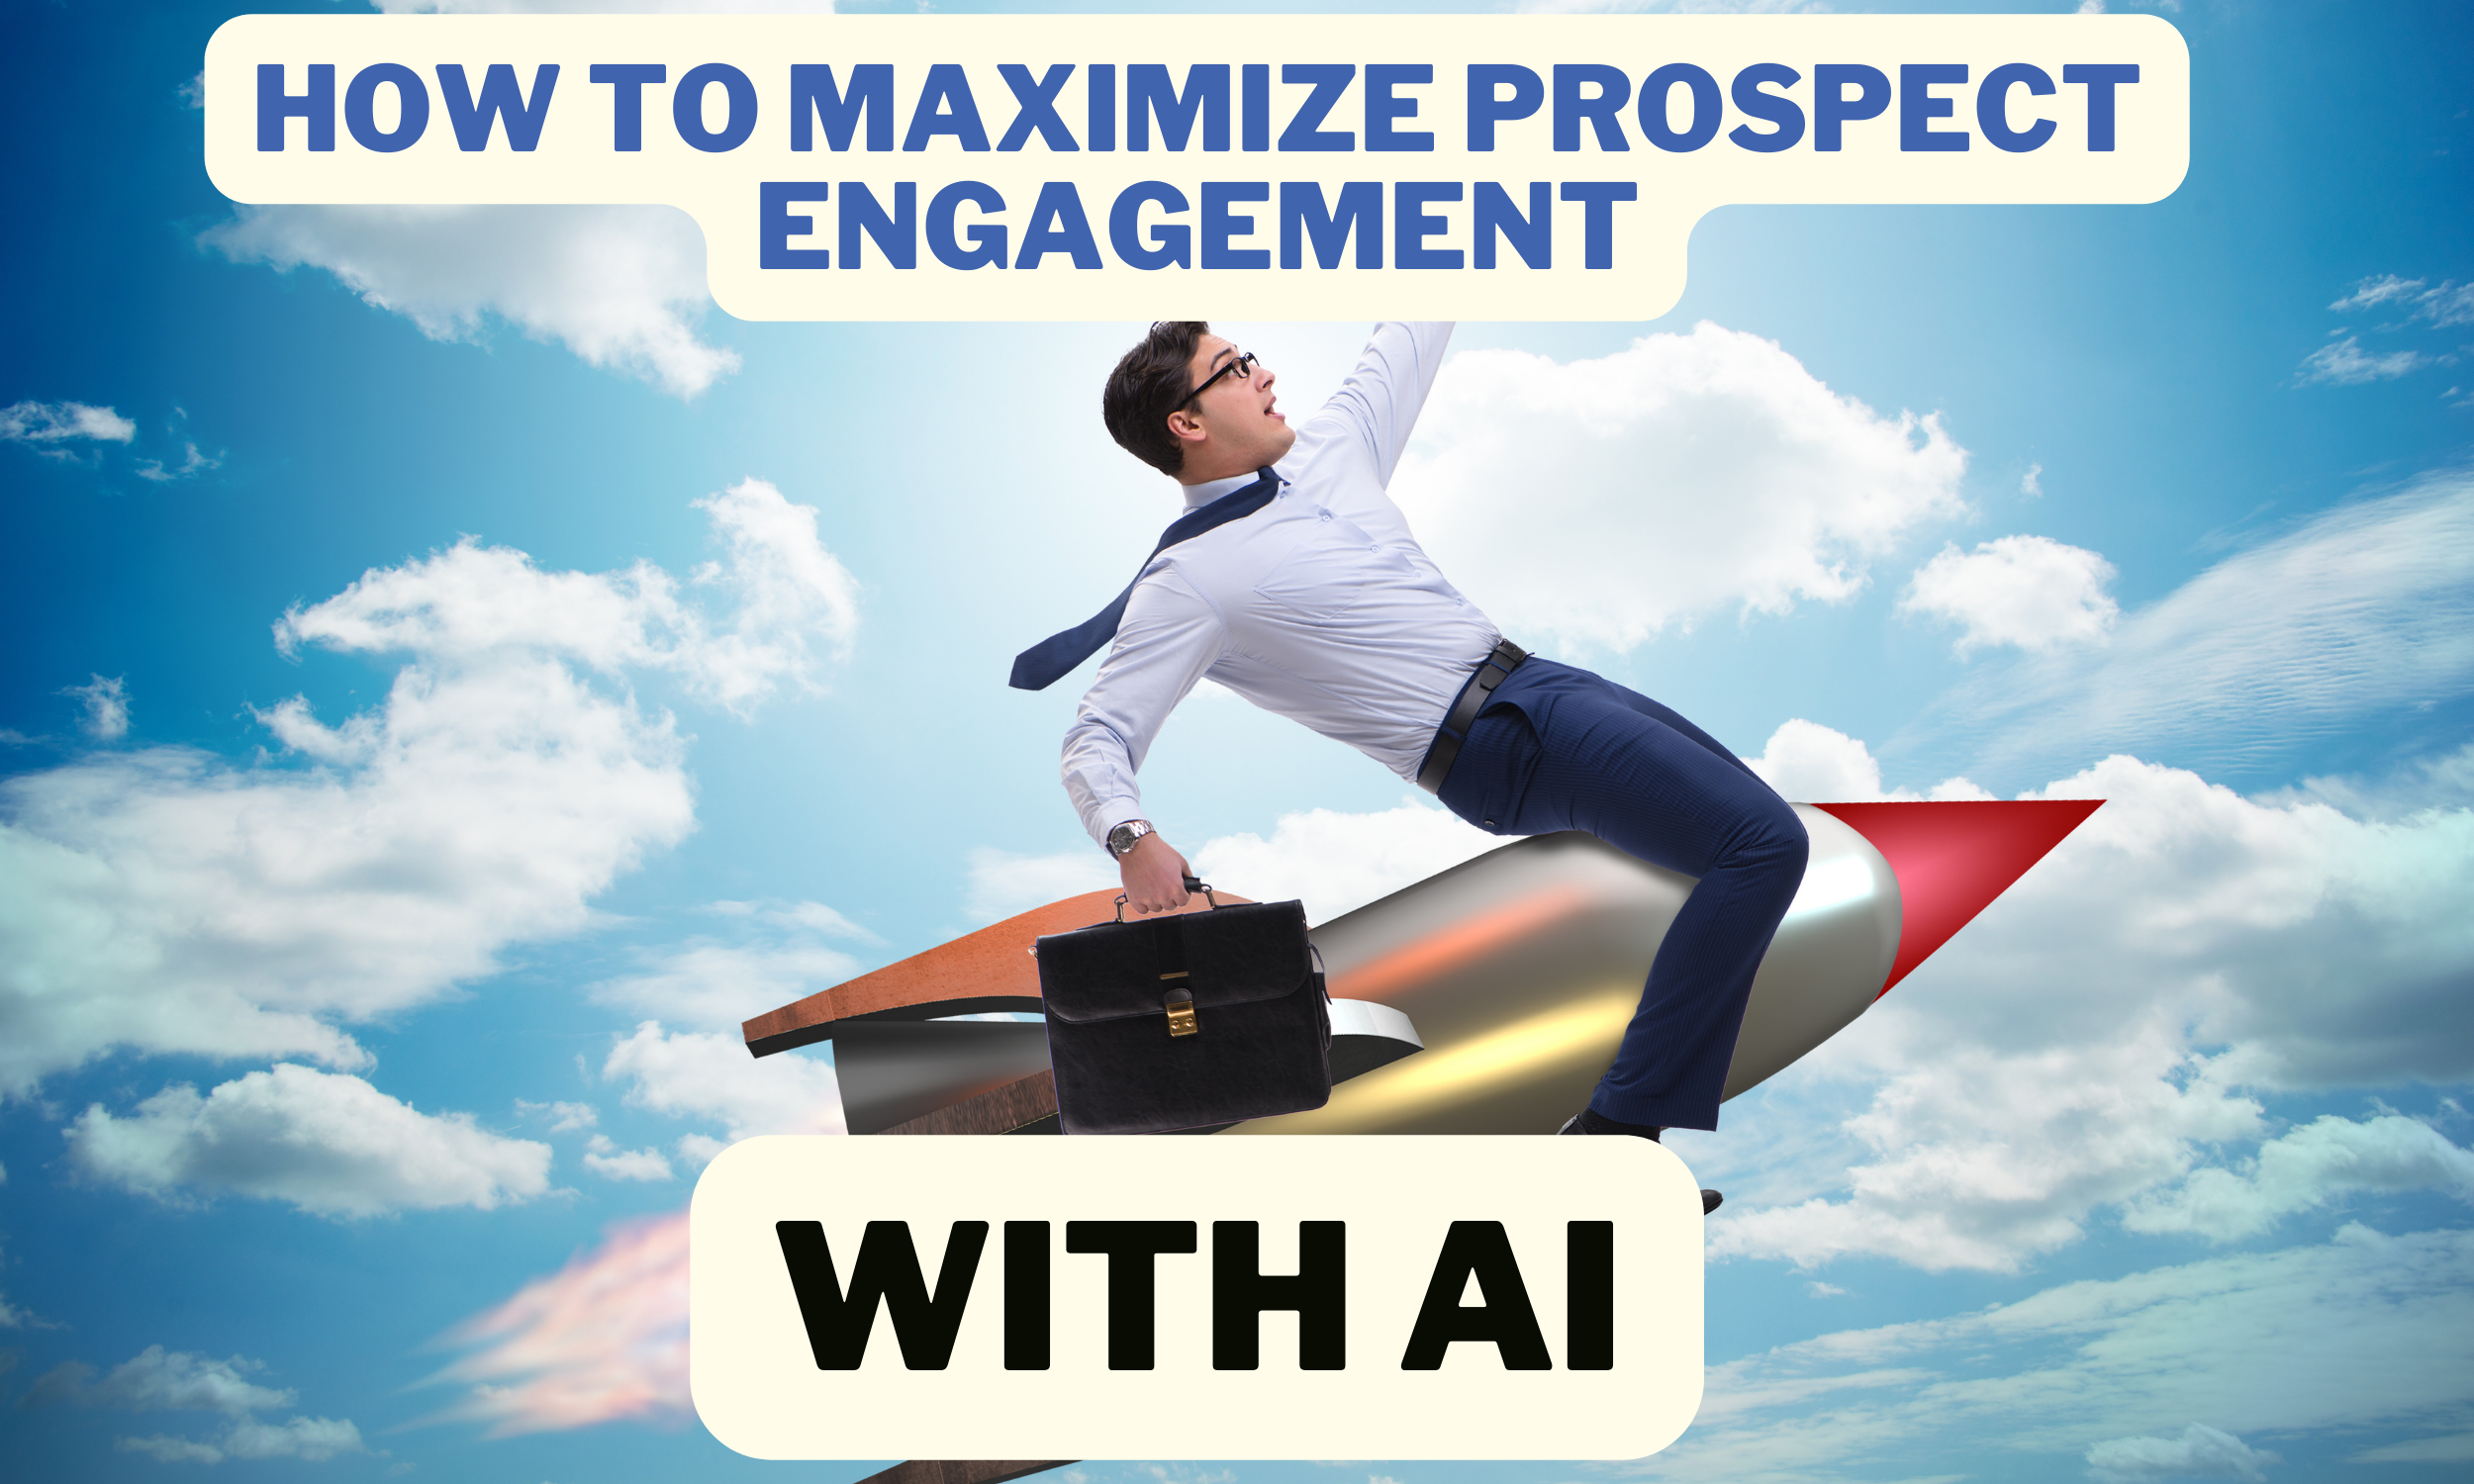 How to Maximize Prospect Engagement with an AI Scheduling Assistant